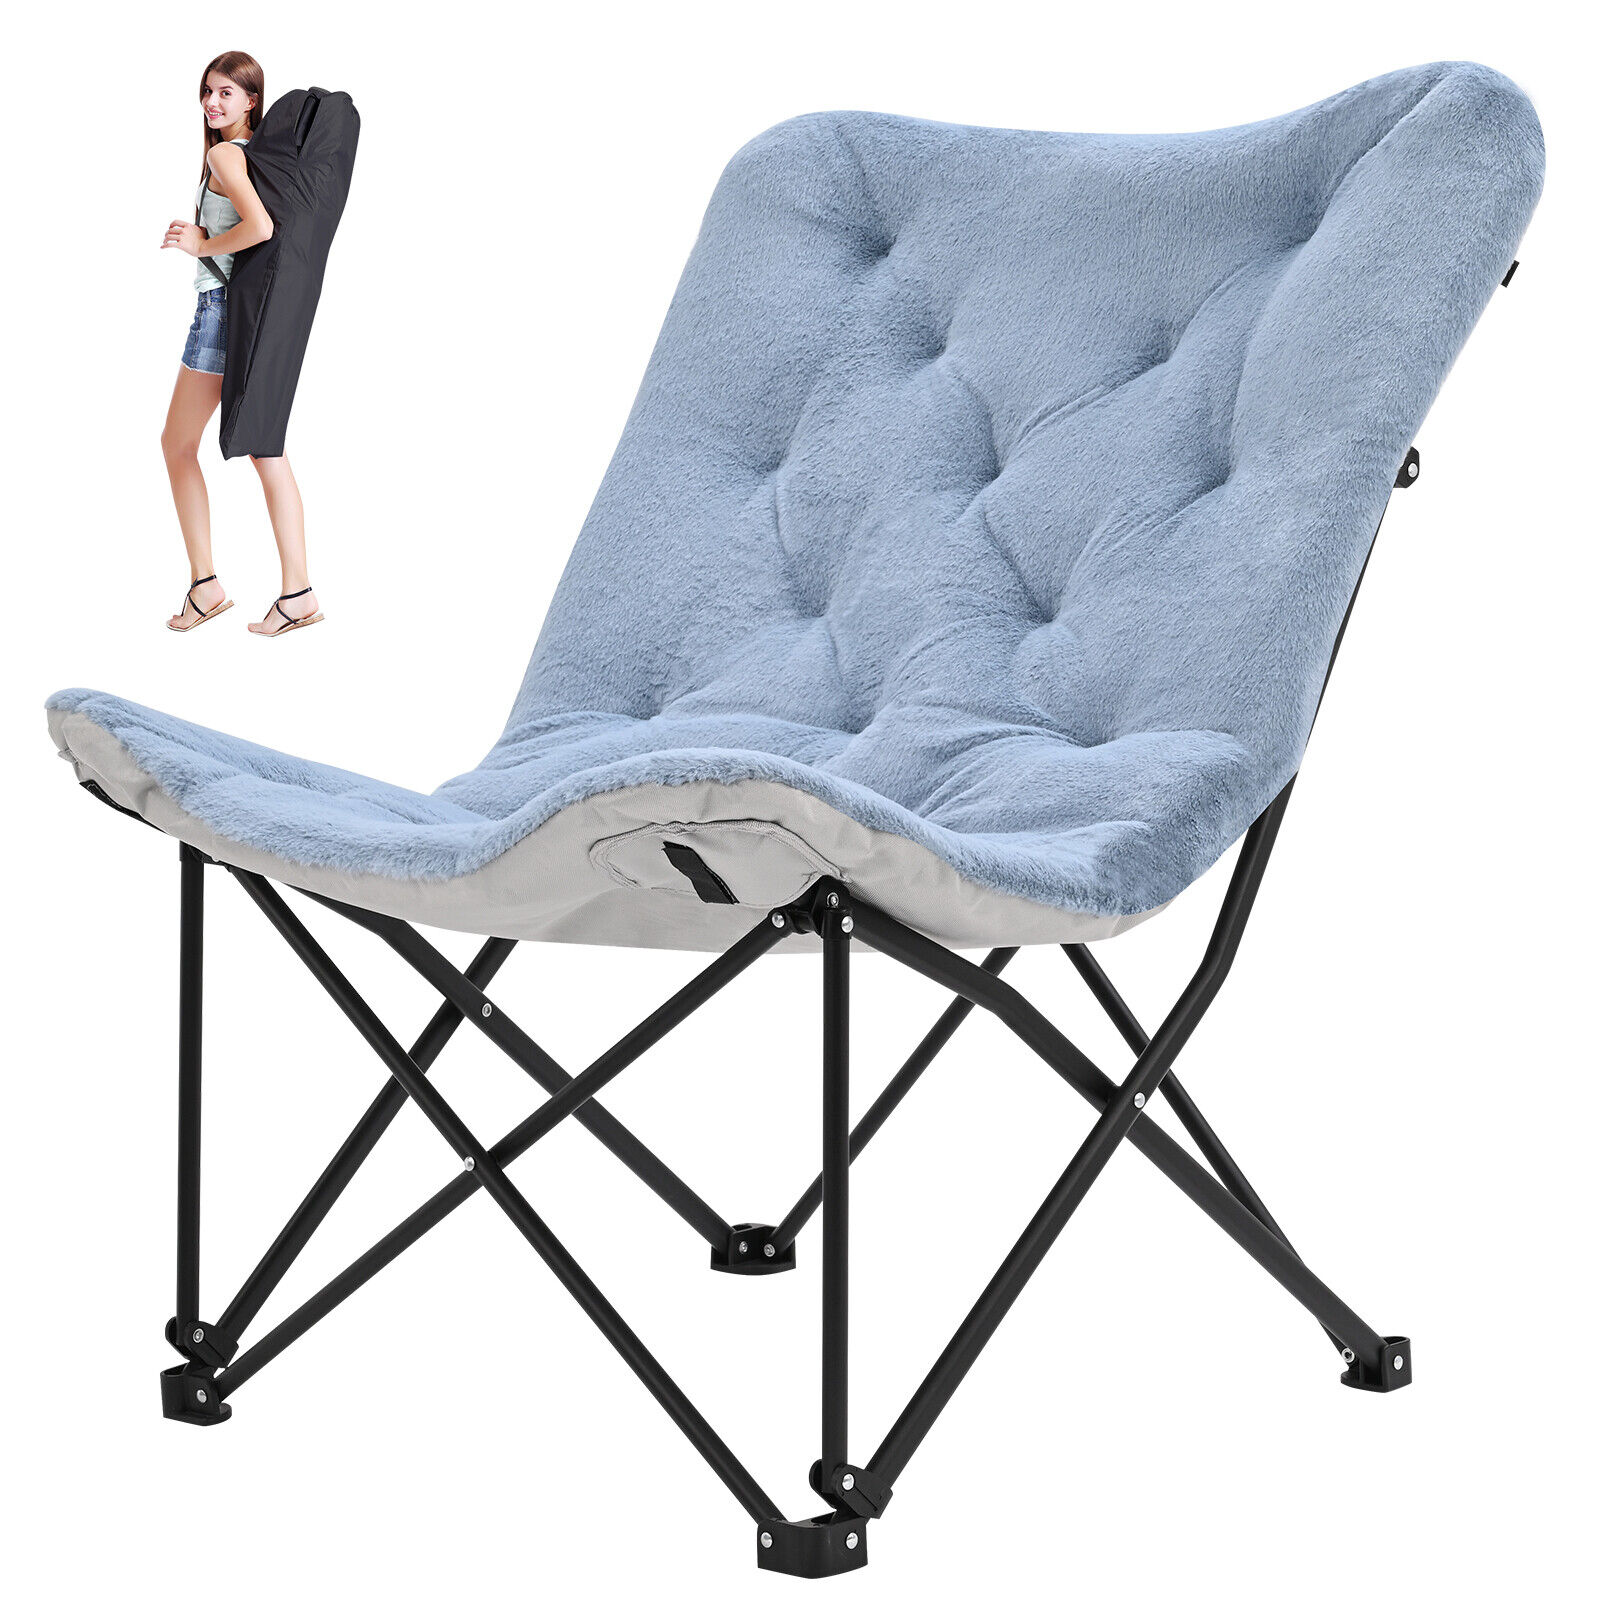 Oversized Comfy Saucer Chair Folding Lounge Chair for Bedroom and Living Room